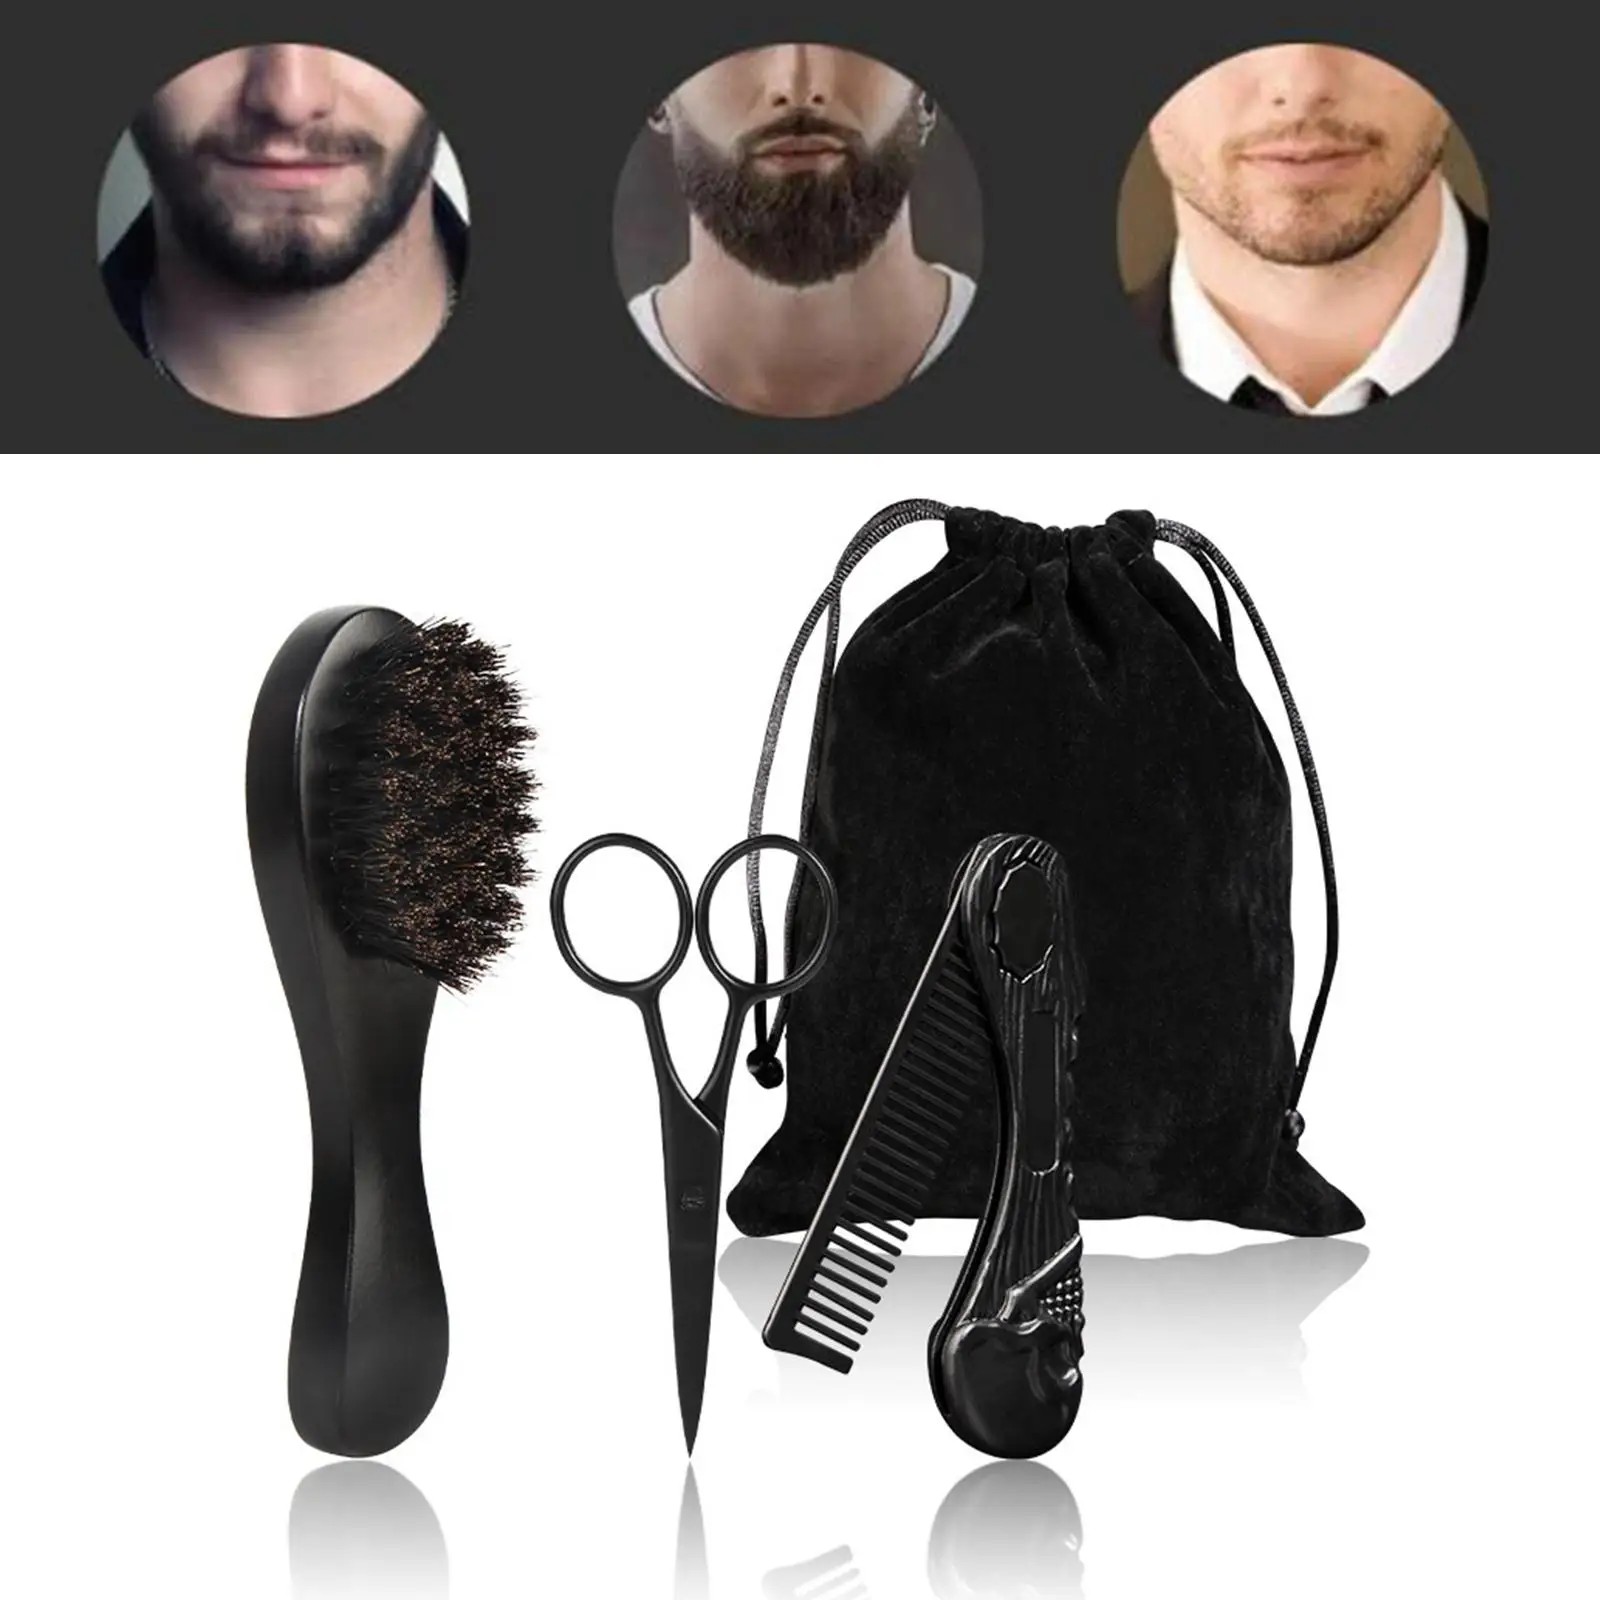 3 Pieces Professional Beard Care Kit for Men Gift Pocket Comb Brush with Dustproof Bag for Home Men`s Cleaning Grooming Tool